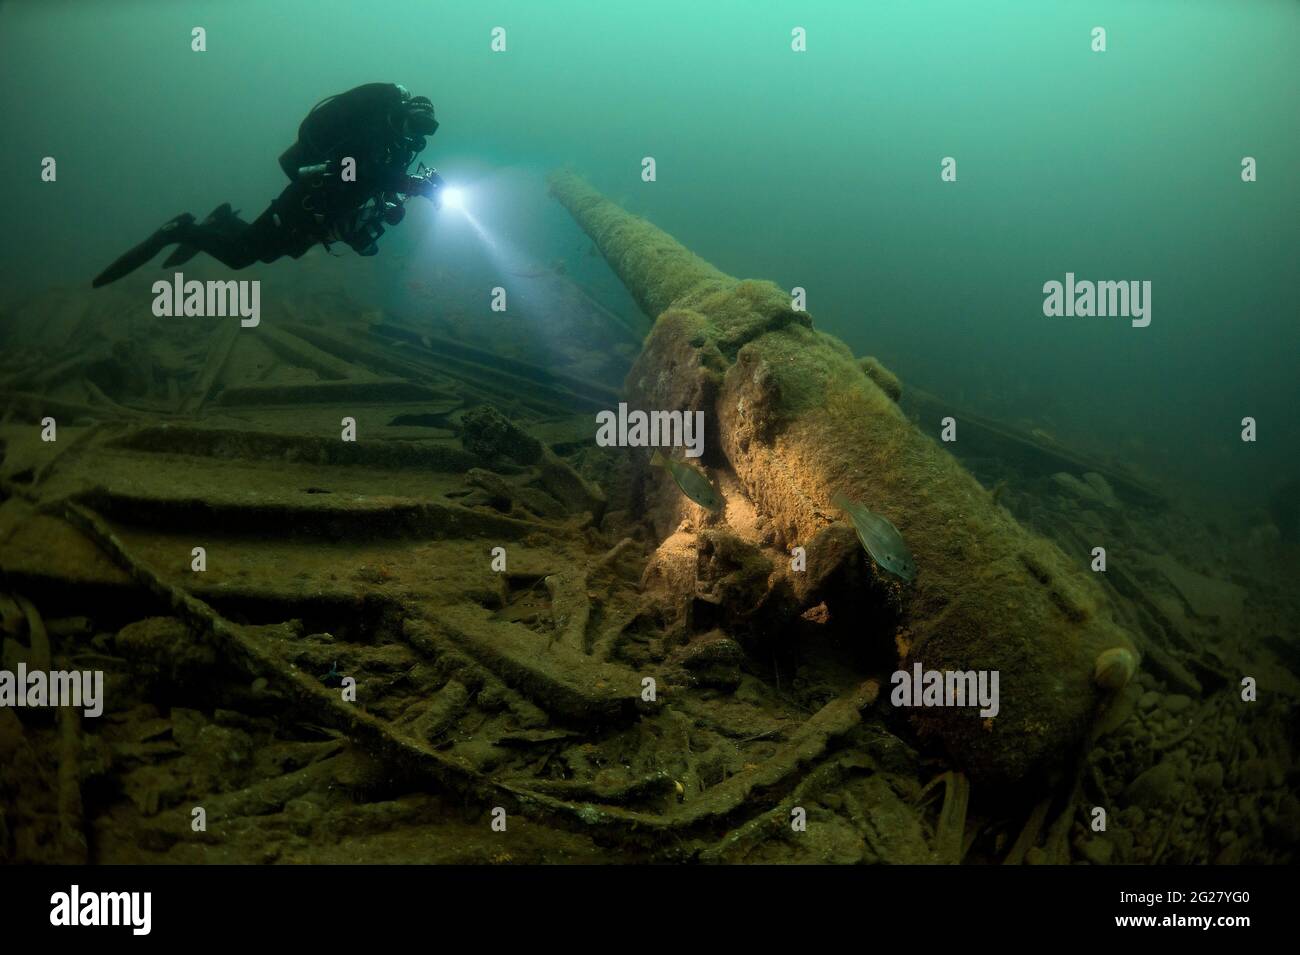 Diver exploring the wreck of the SS Laurentic ocean liner sunk during WW1. Stock Photo